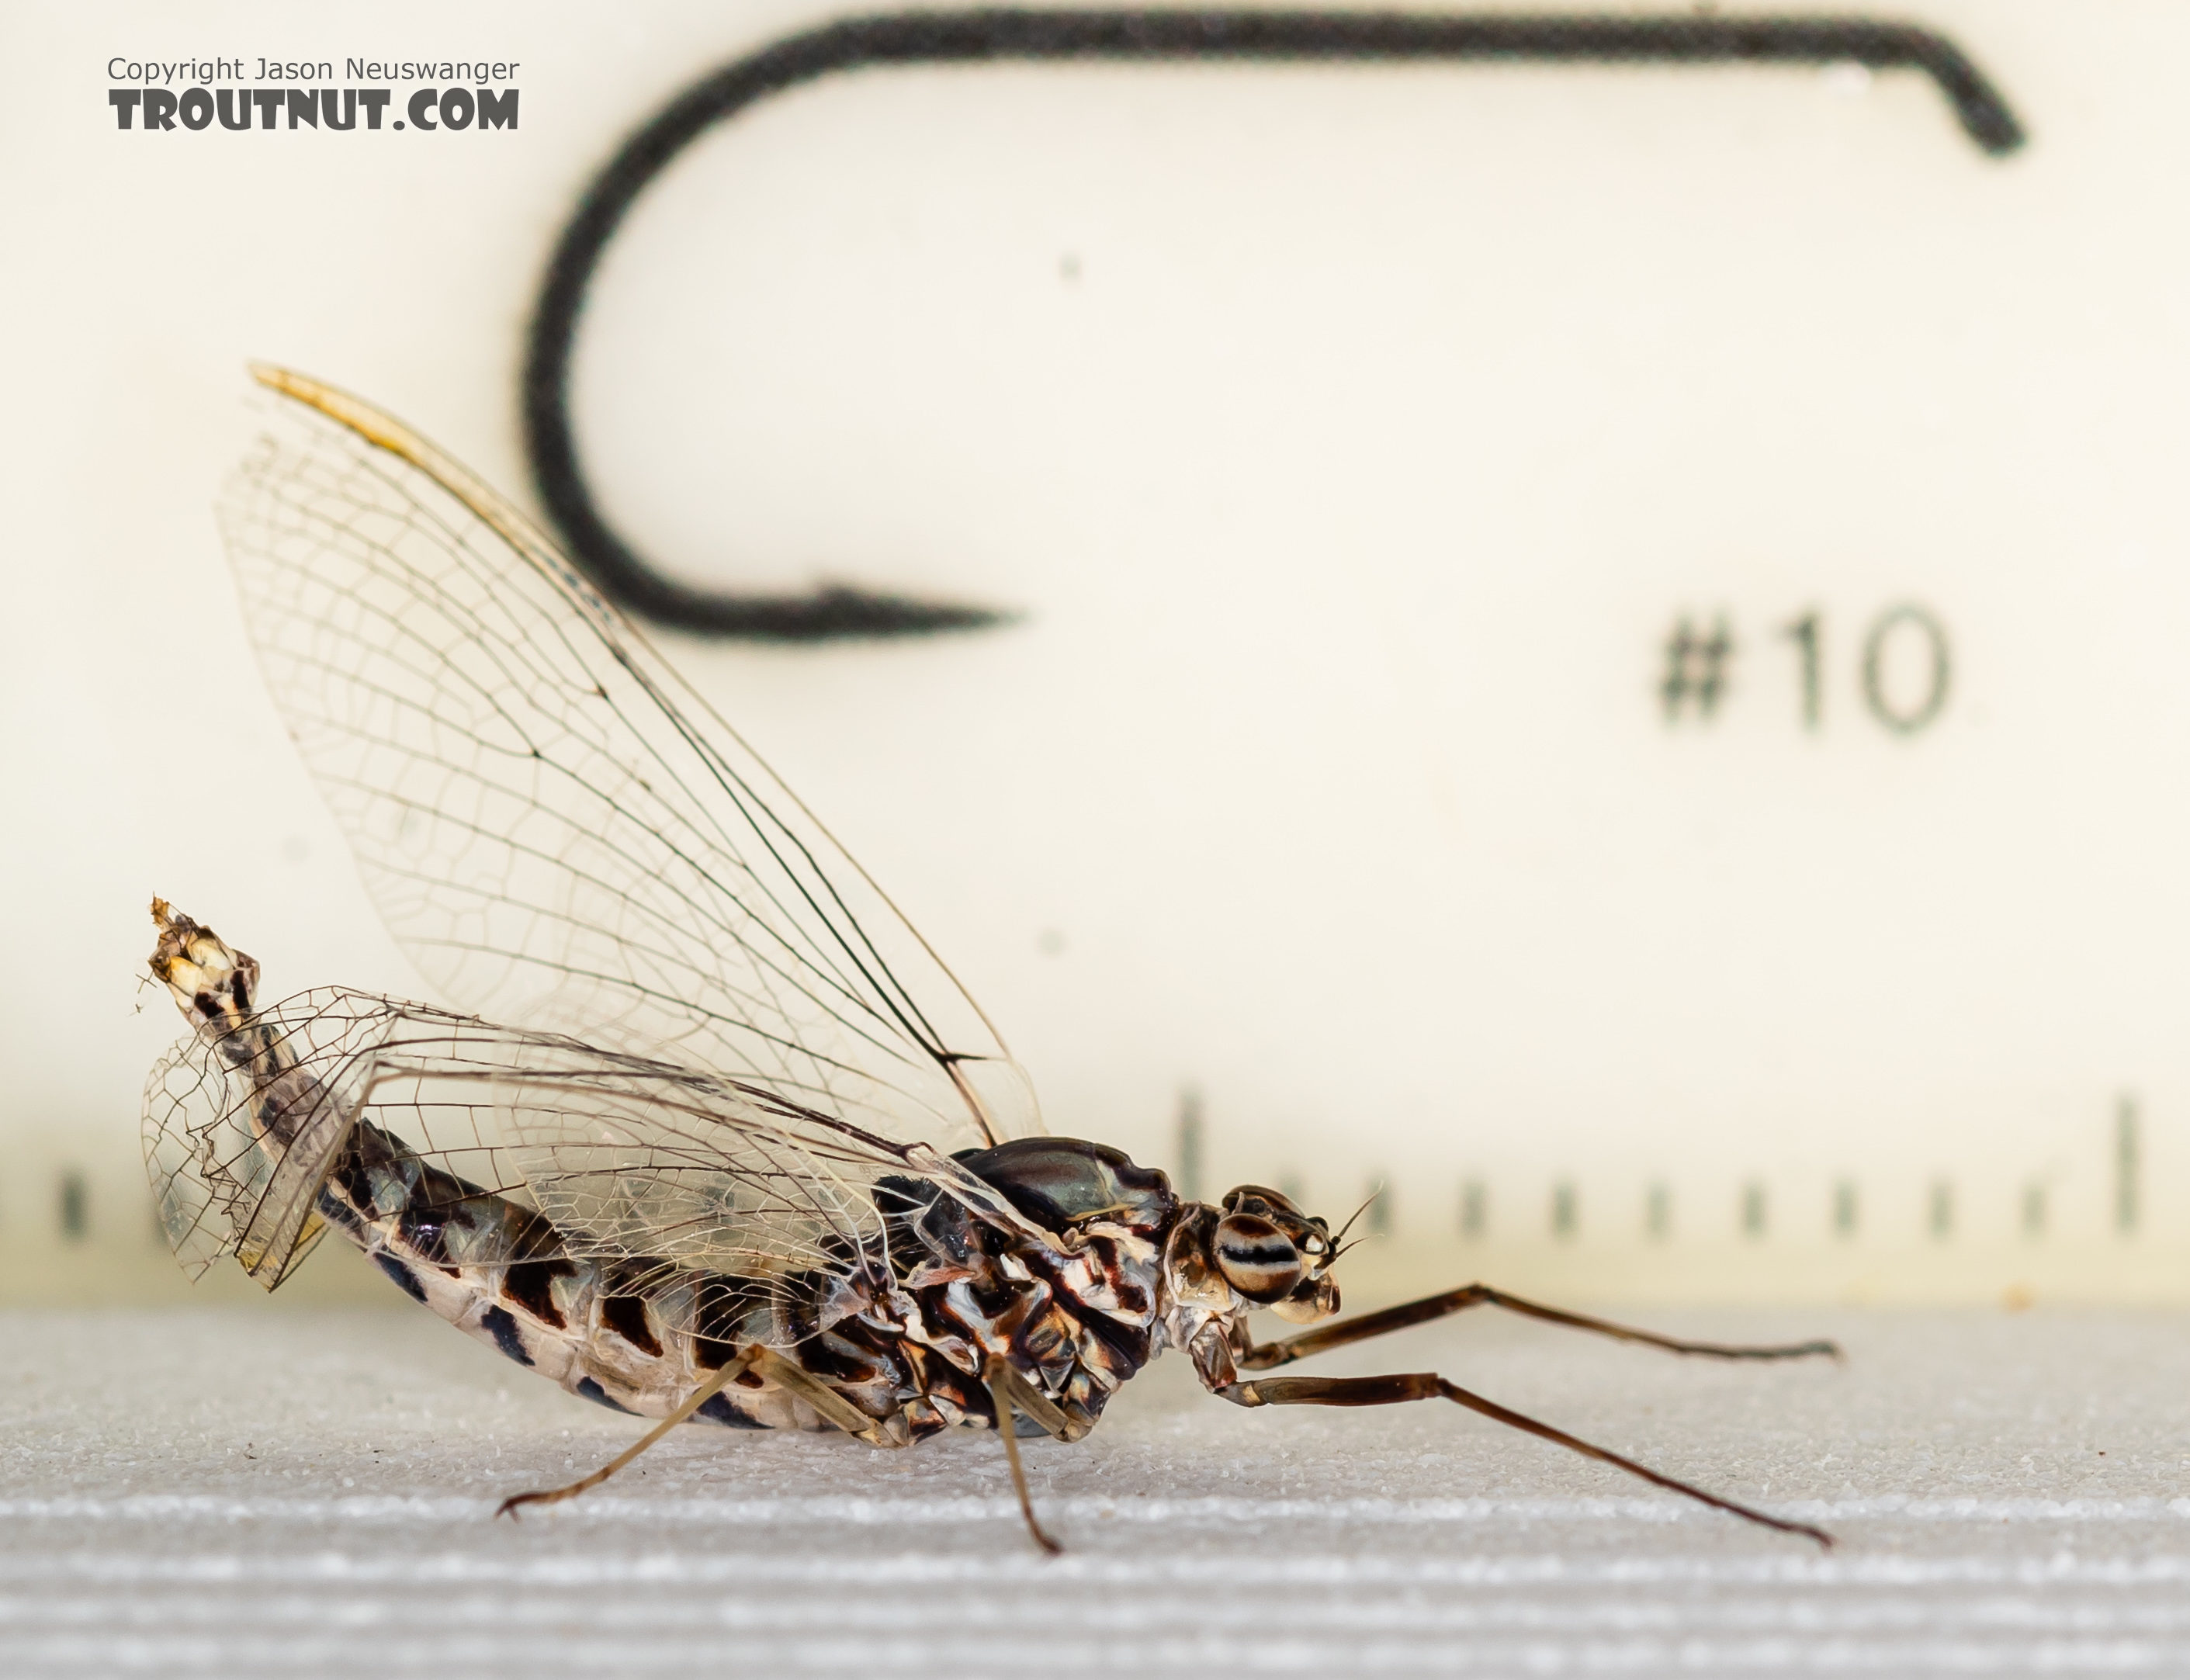 The last abdominal segments of this one were damaged.  Female Siphlonurus alternatus (Gray Drake) Mayfly Spinner from the Gallatin River in Montana